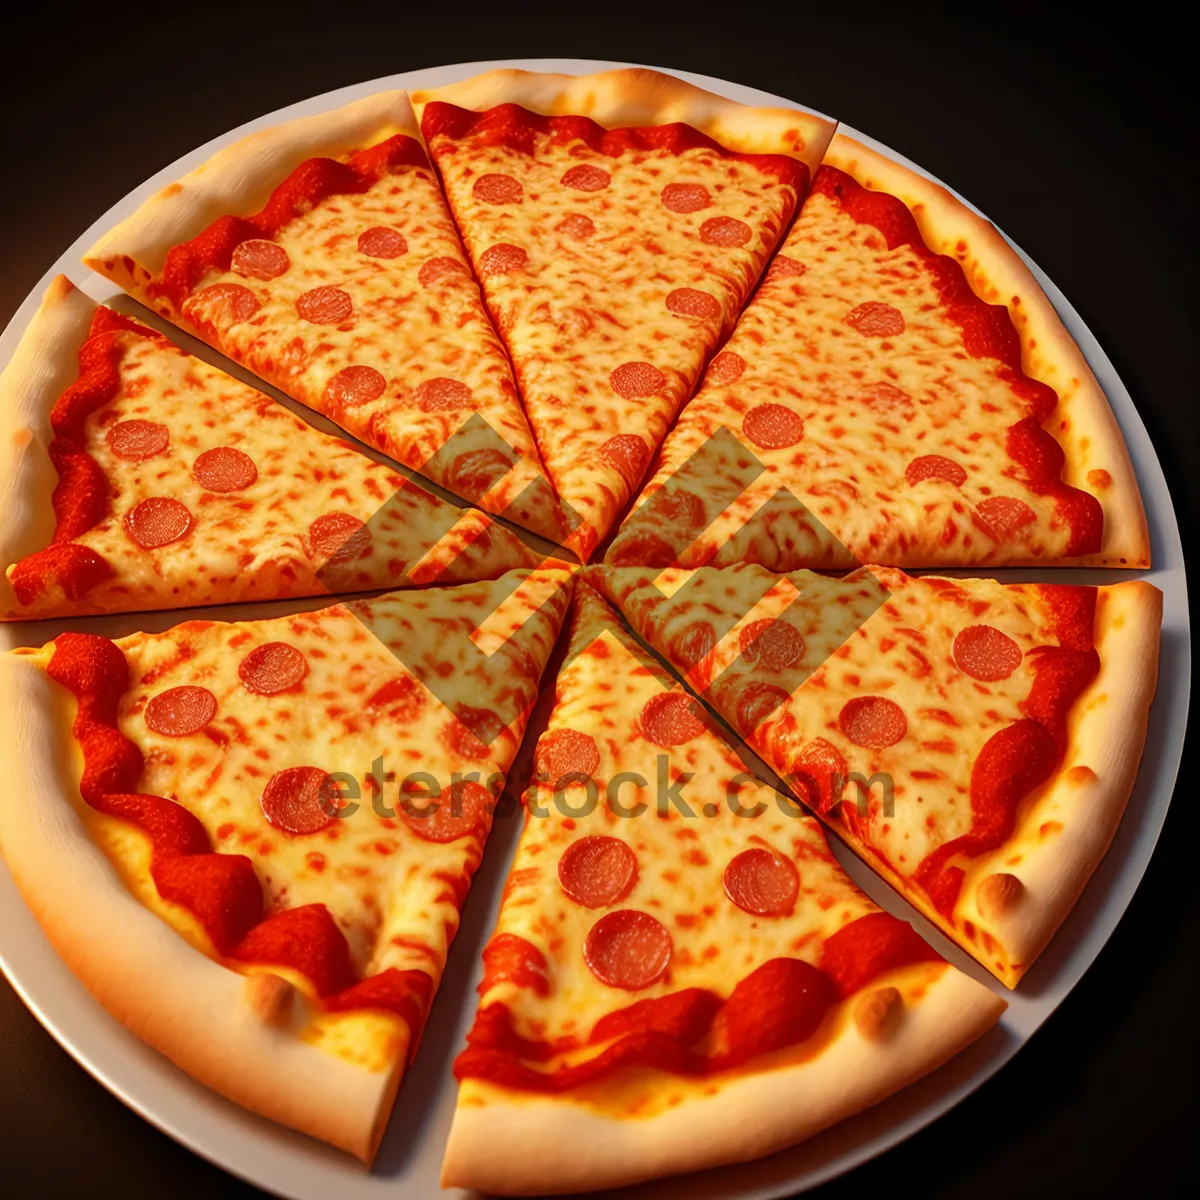 Picture of Gourmet Pizza Delight - Deliciously Melty Cheese and Tasty Pepperoni to Satisfy Your Cravings